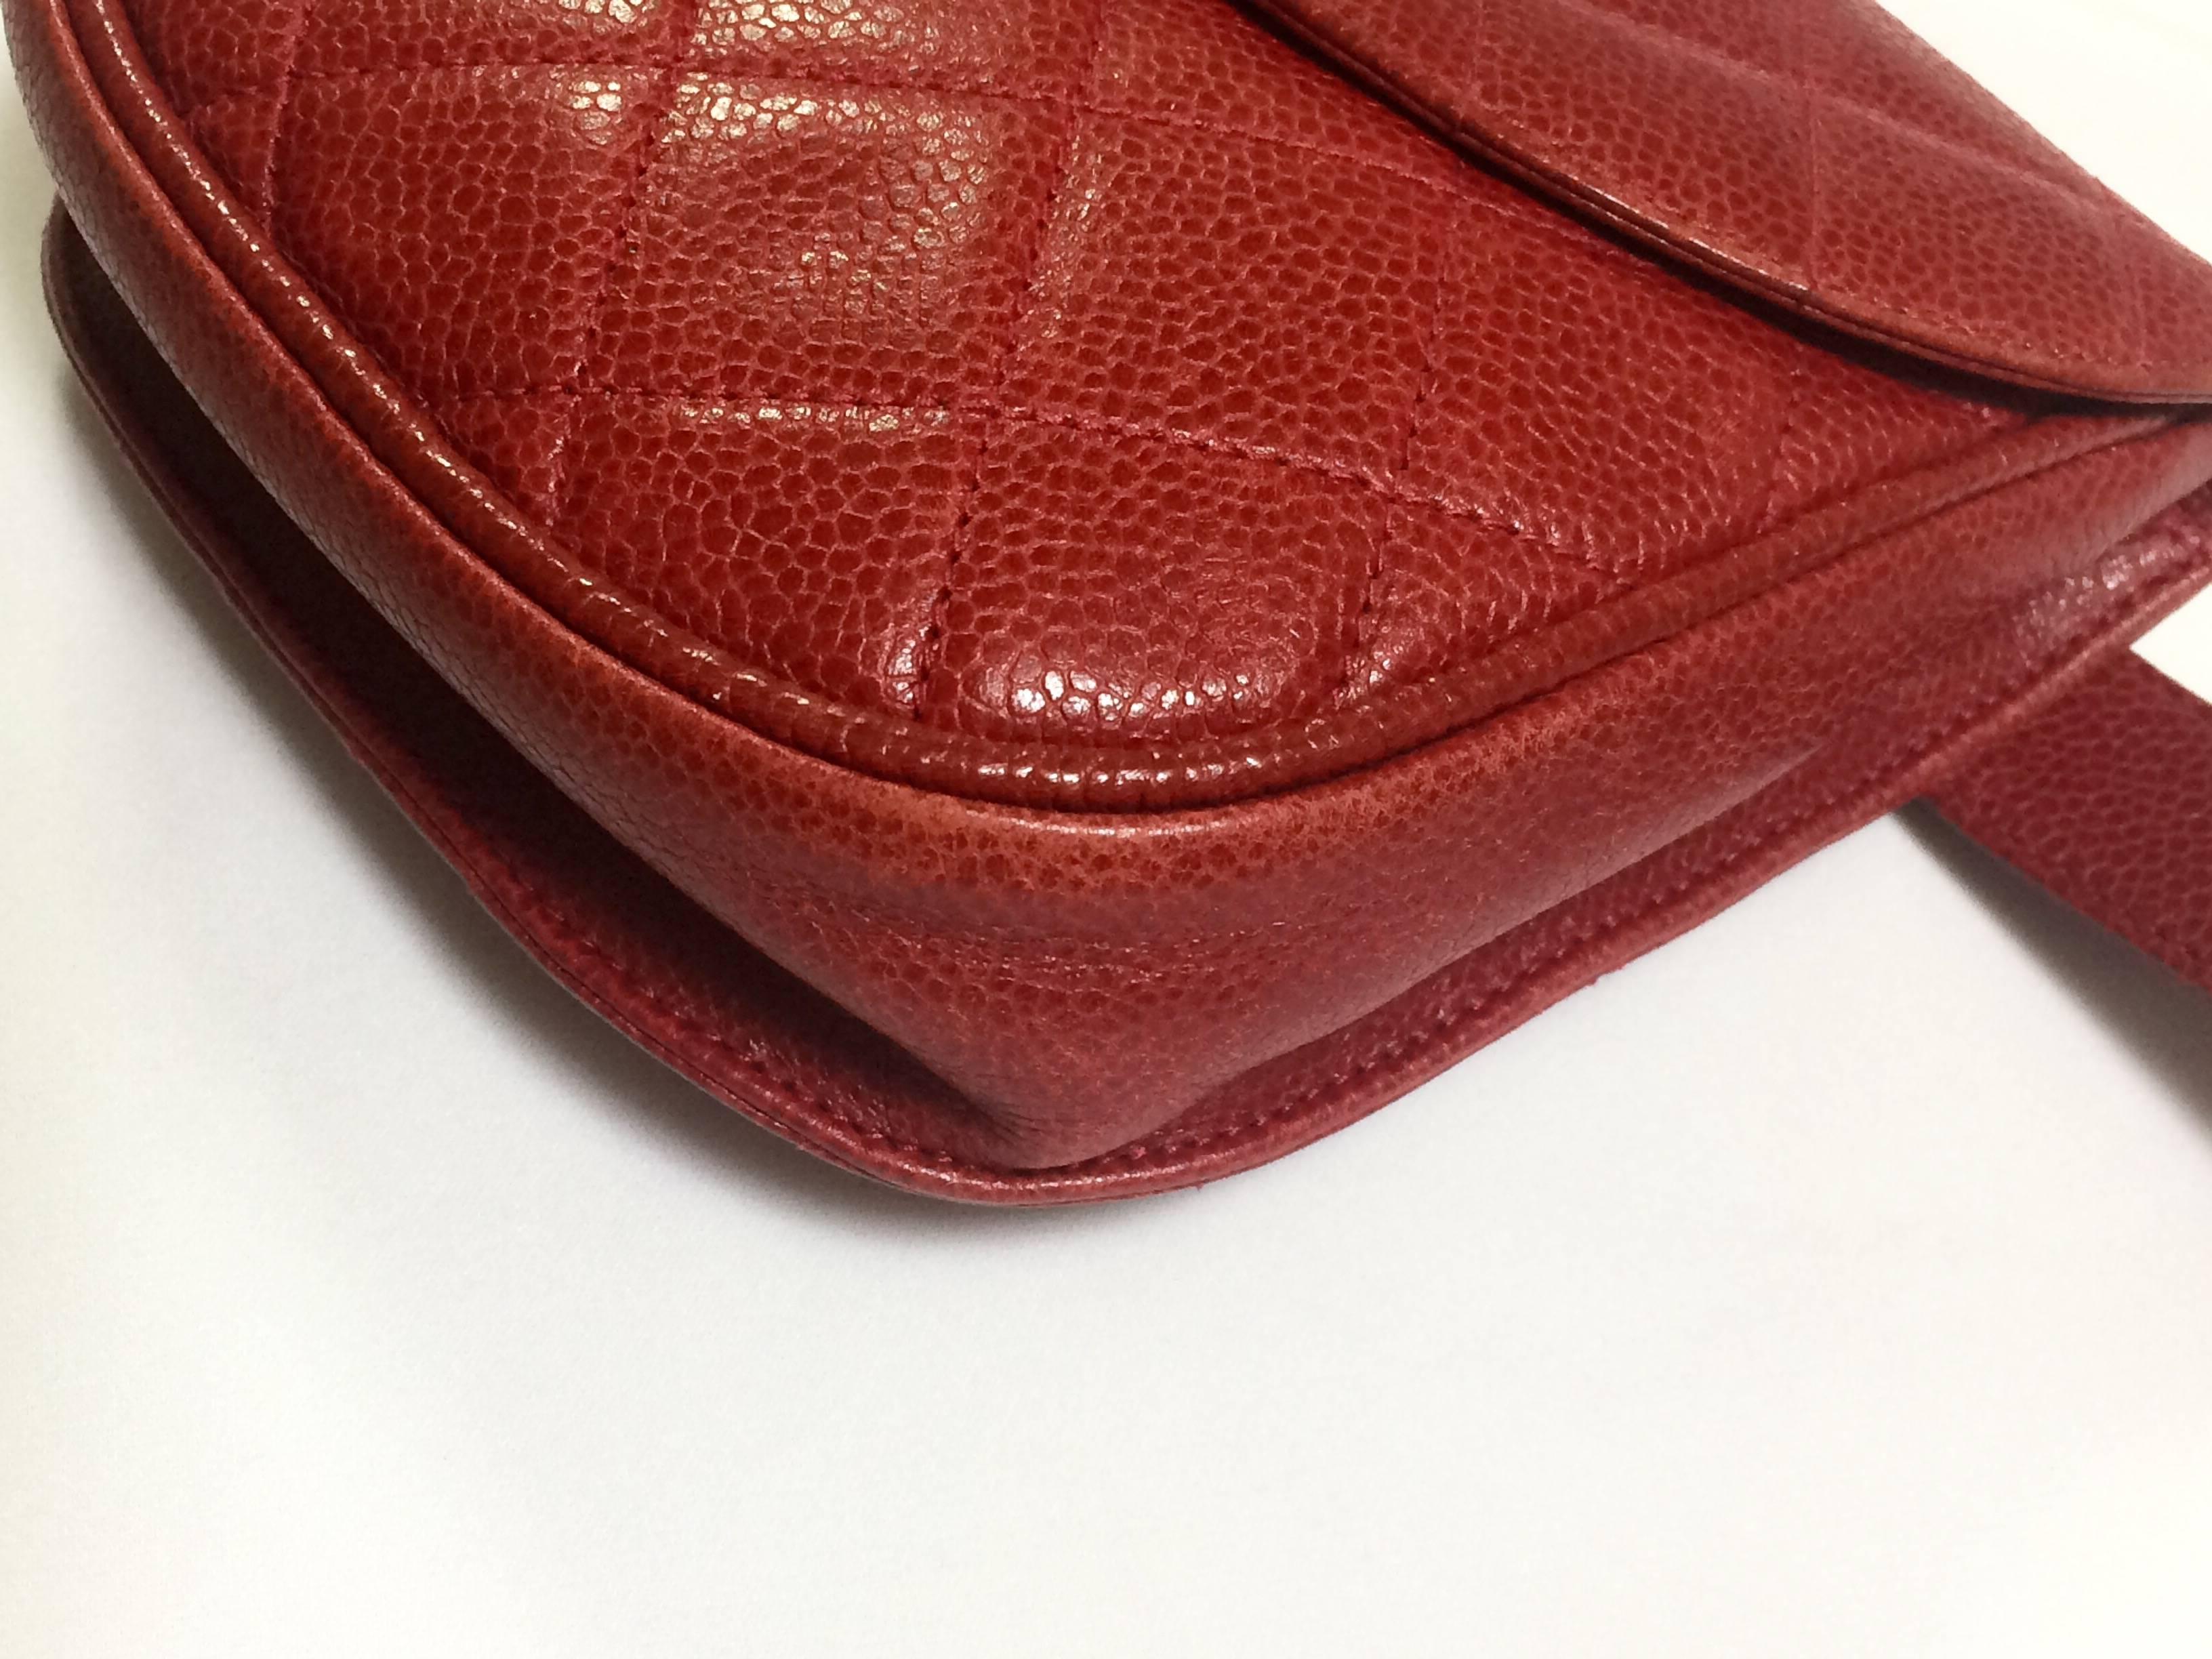 Women's Vintage CHANEL 2.55 red caviar leather waist purse, fanny pack with golden cc.